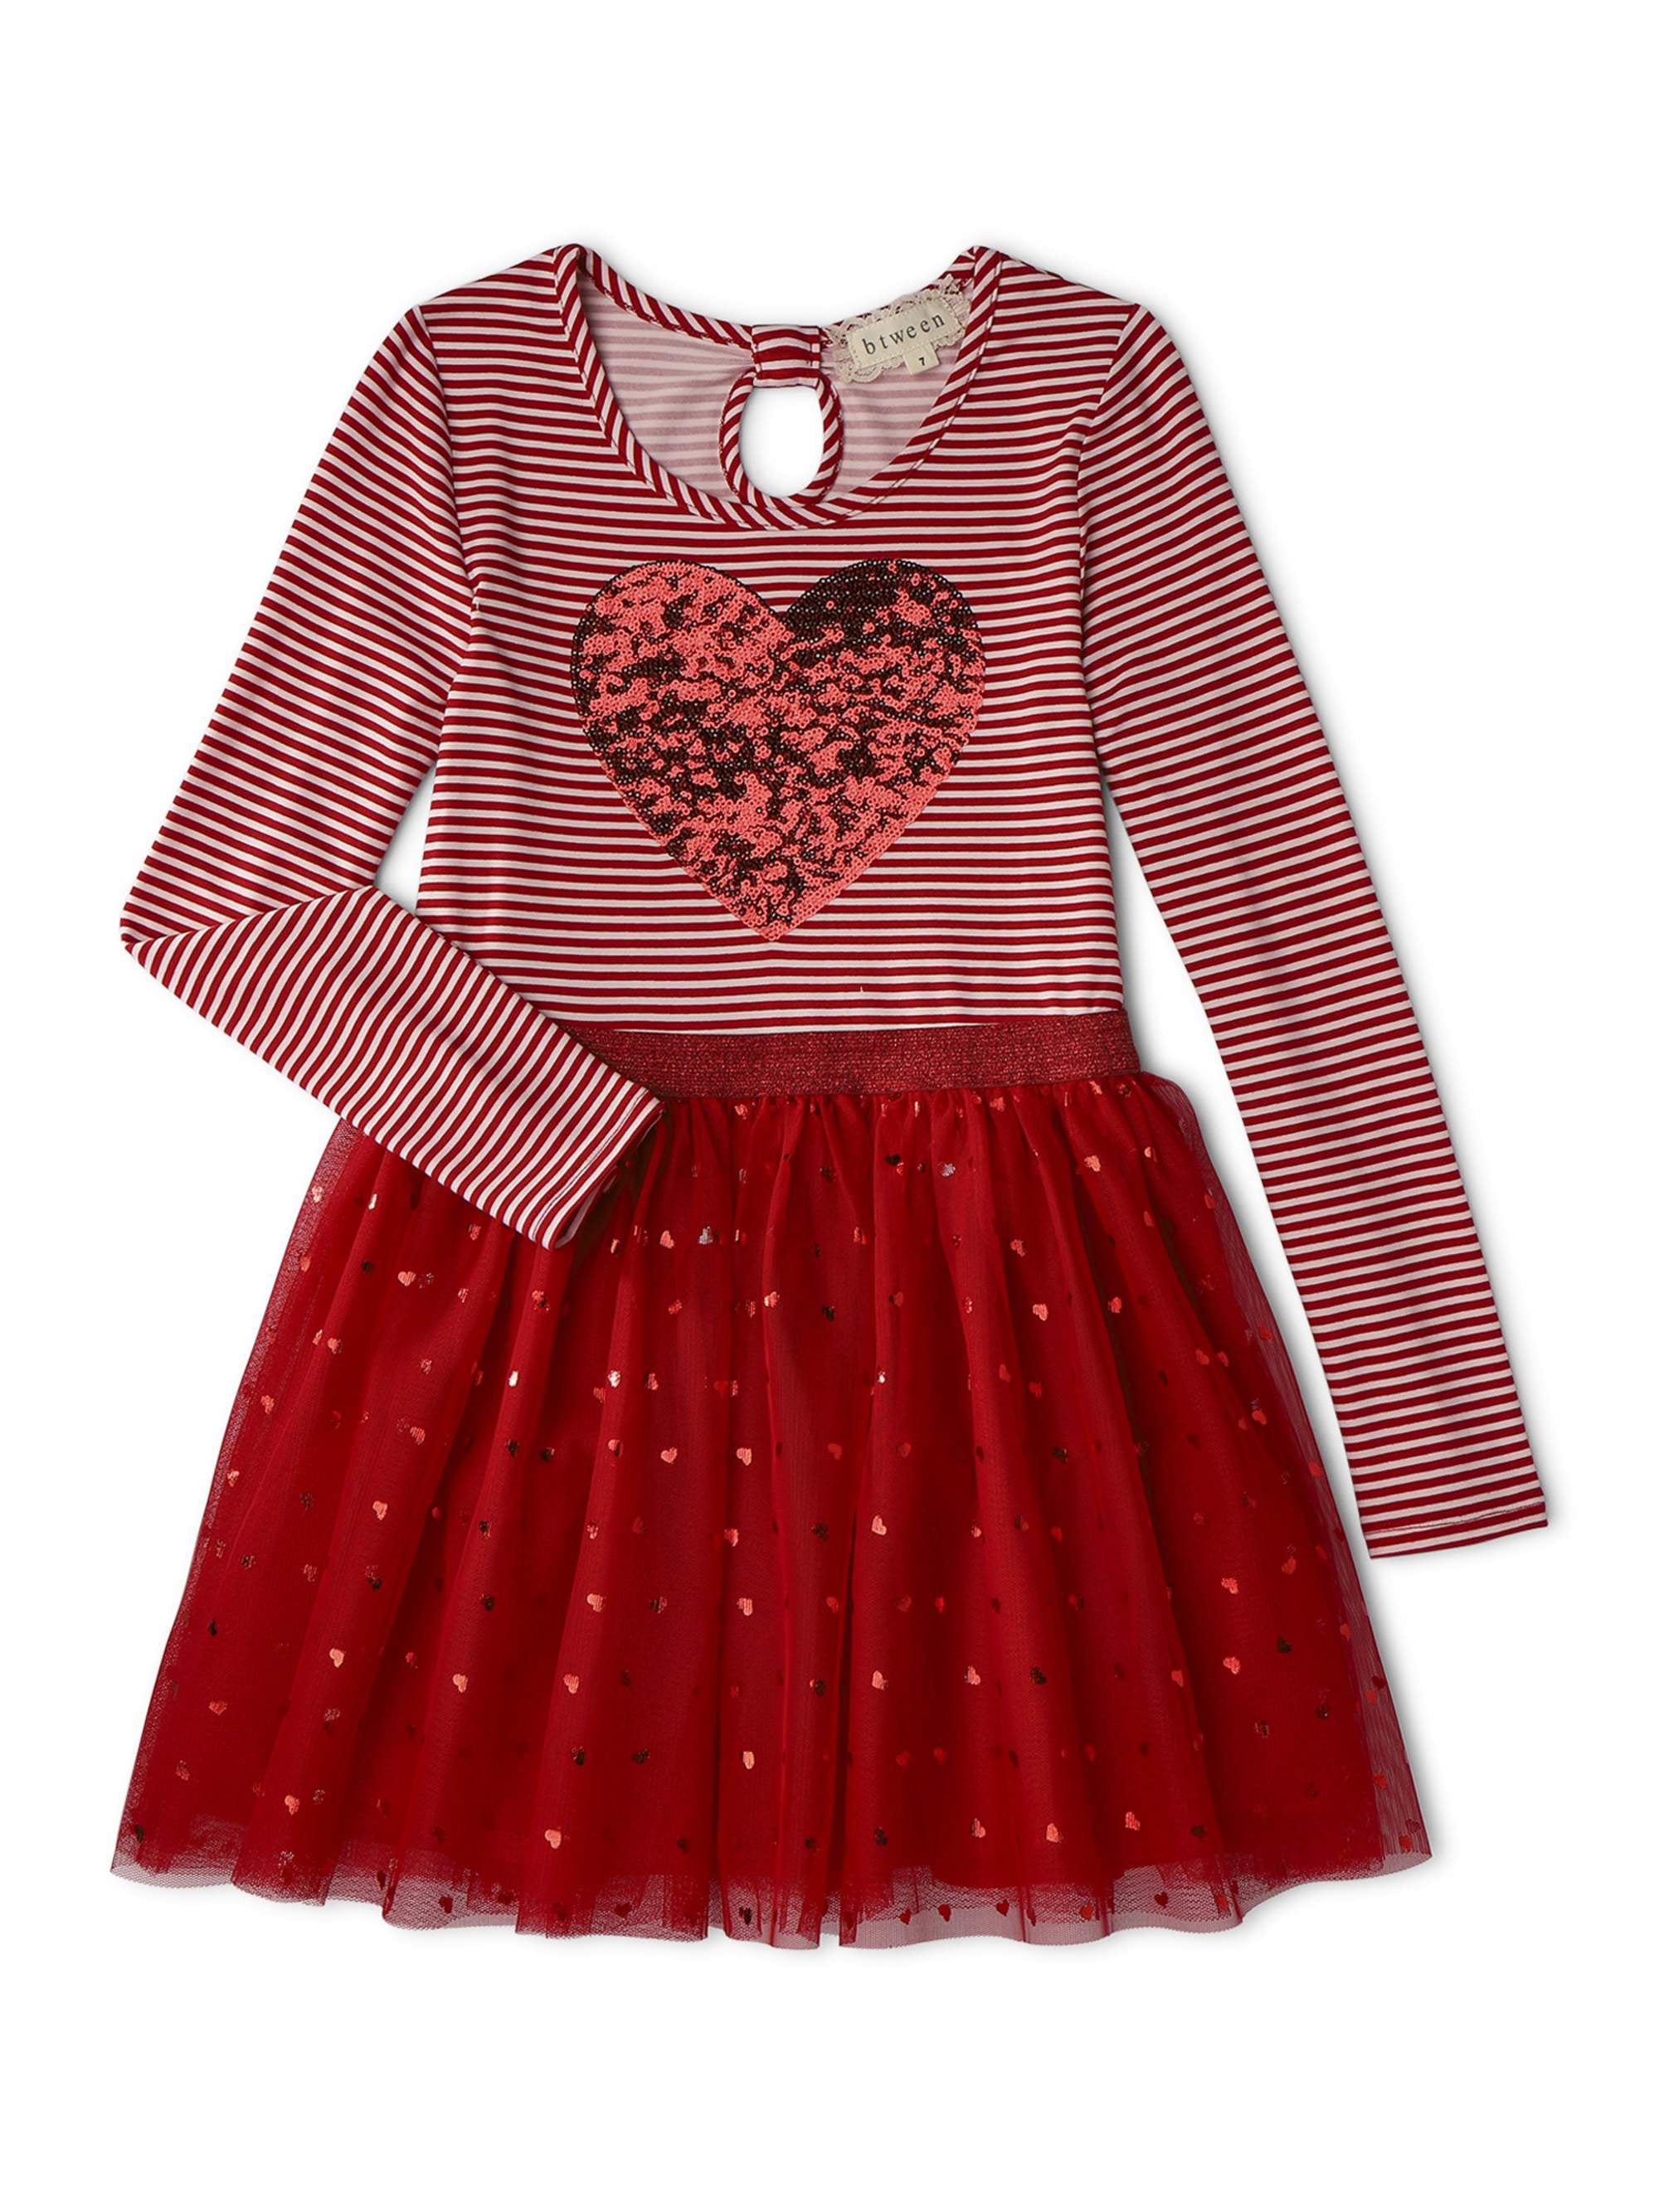 Super Cute Valentines Day Outfits for Little Girls 